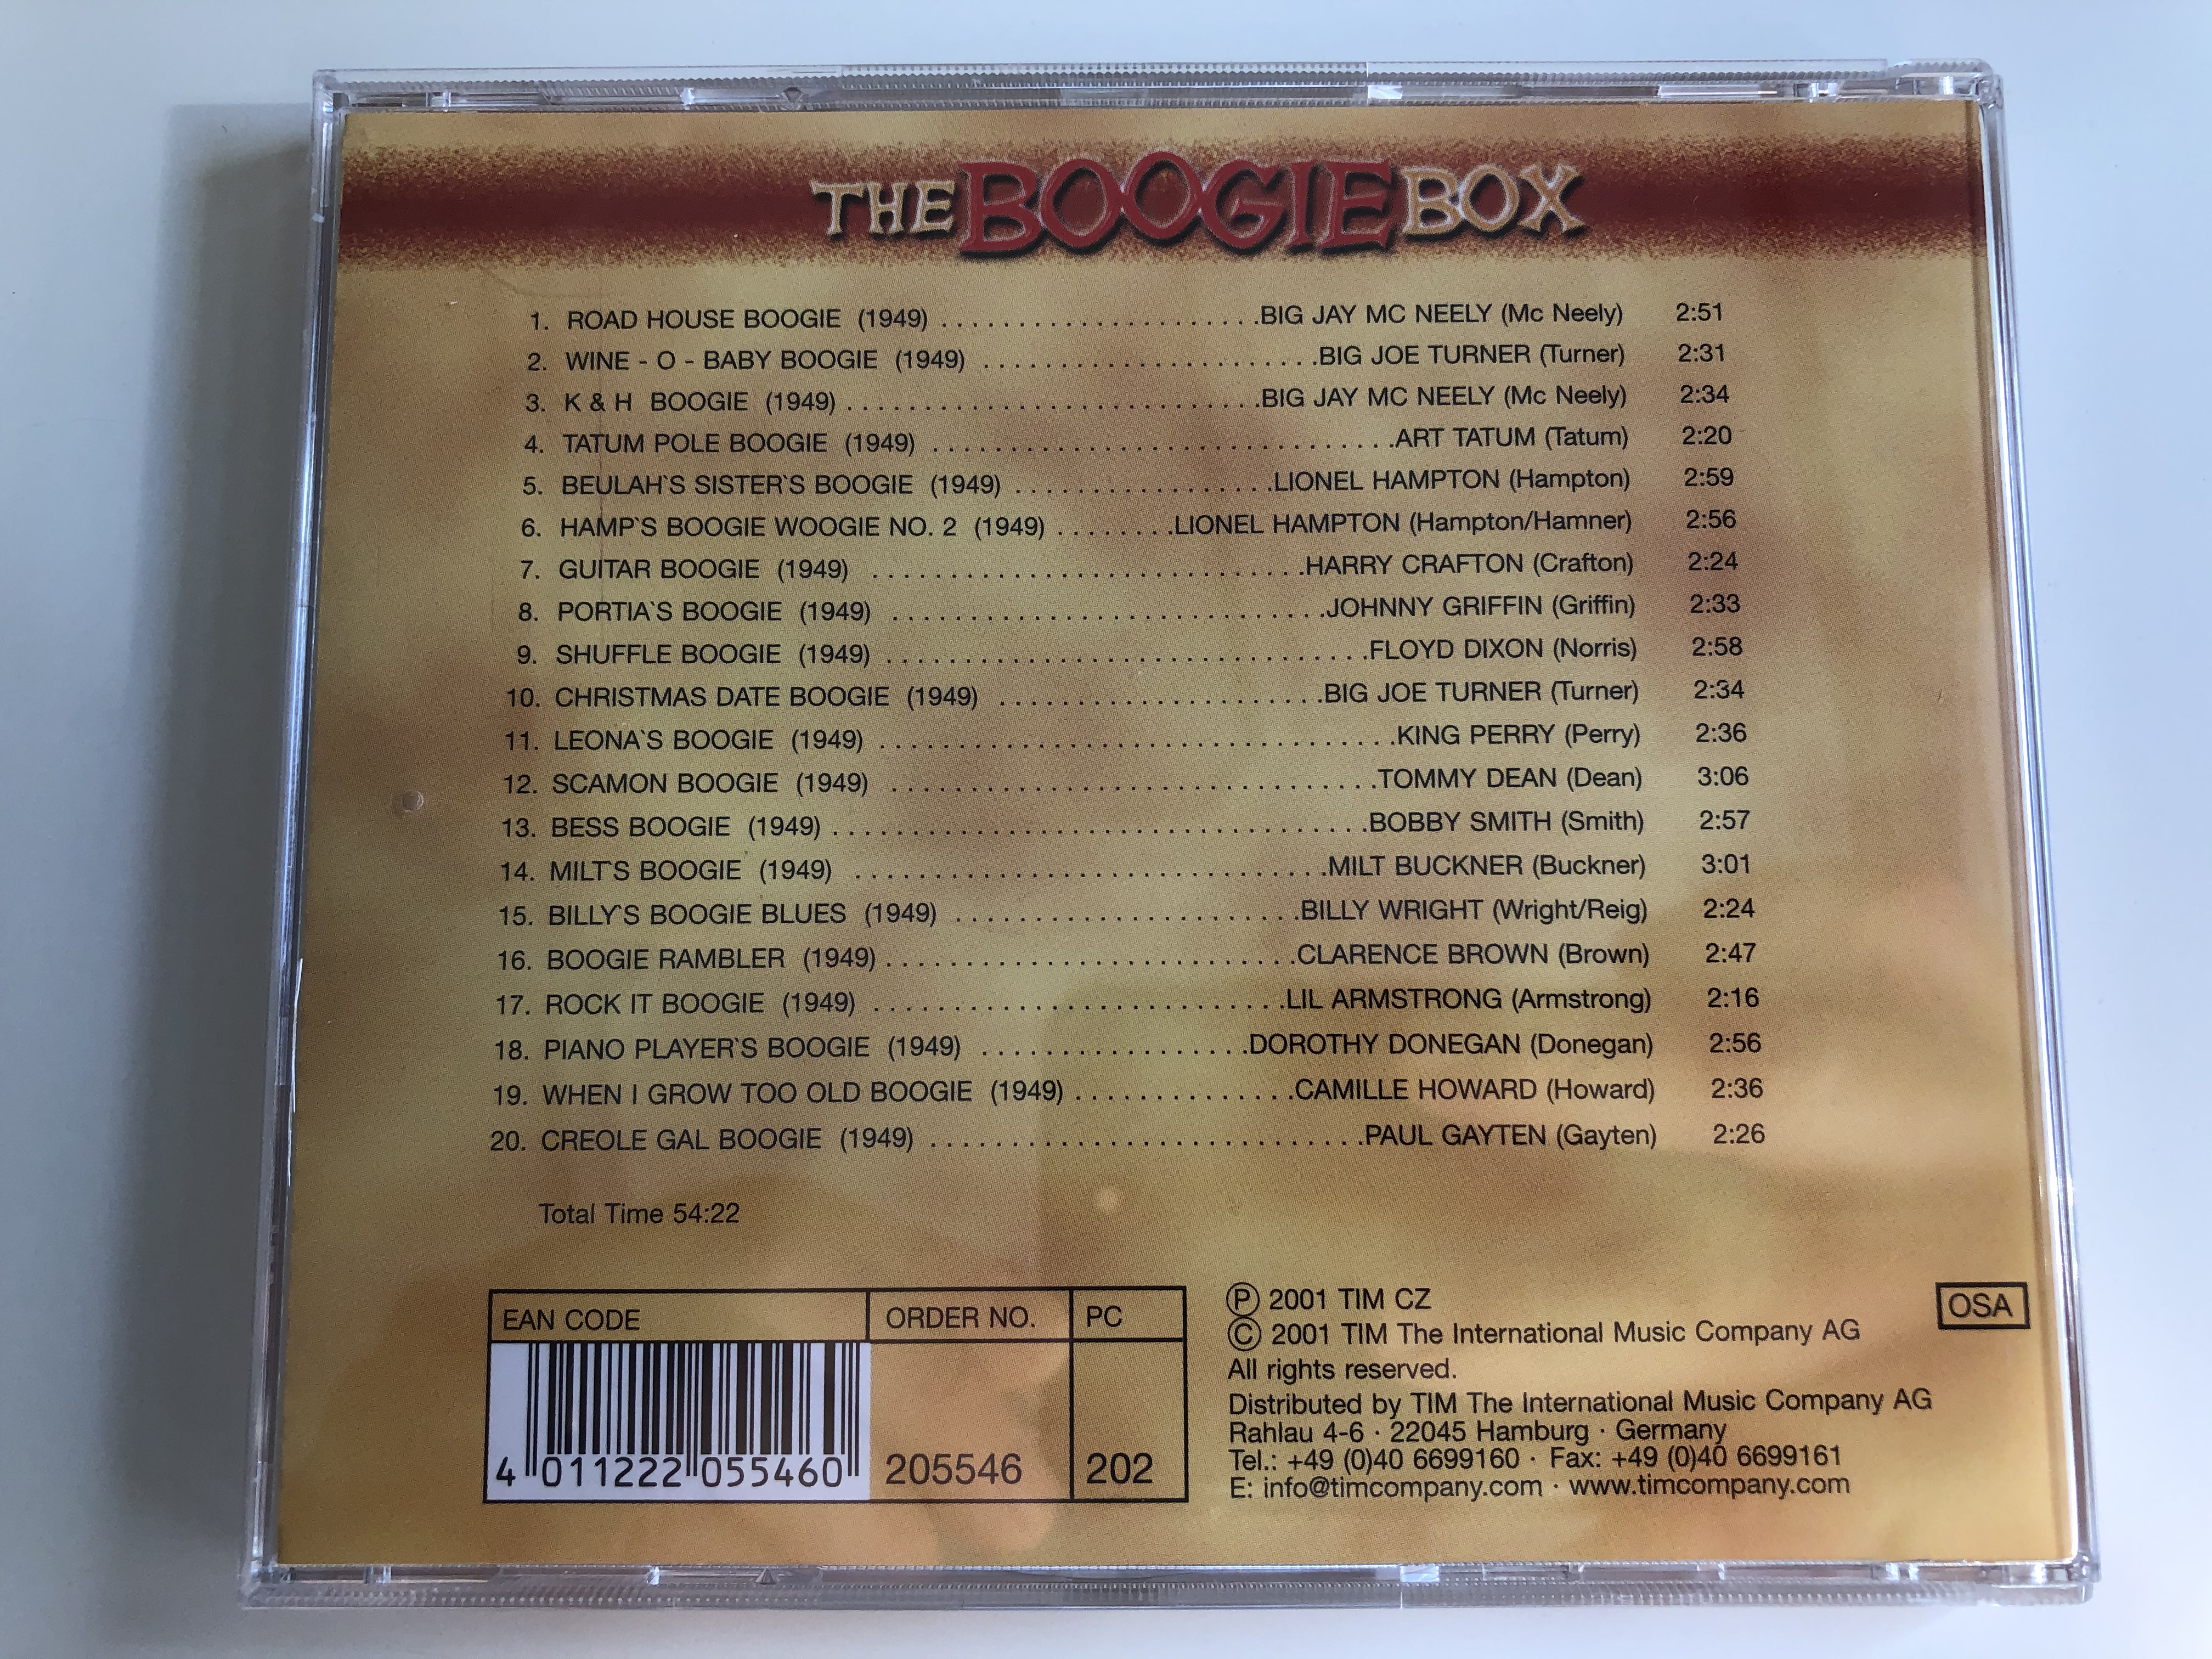 the-boogie-box-vol.-11-art-tatum-big-jay-mcneely-big-joe-turner-harry-crafton-johnny-griffin-king-perry-tommy-dean-bobby-smith-milt-buckner-lil-armstrong-paul-gayten-billy-wright-and-many-others-.jpg